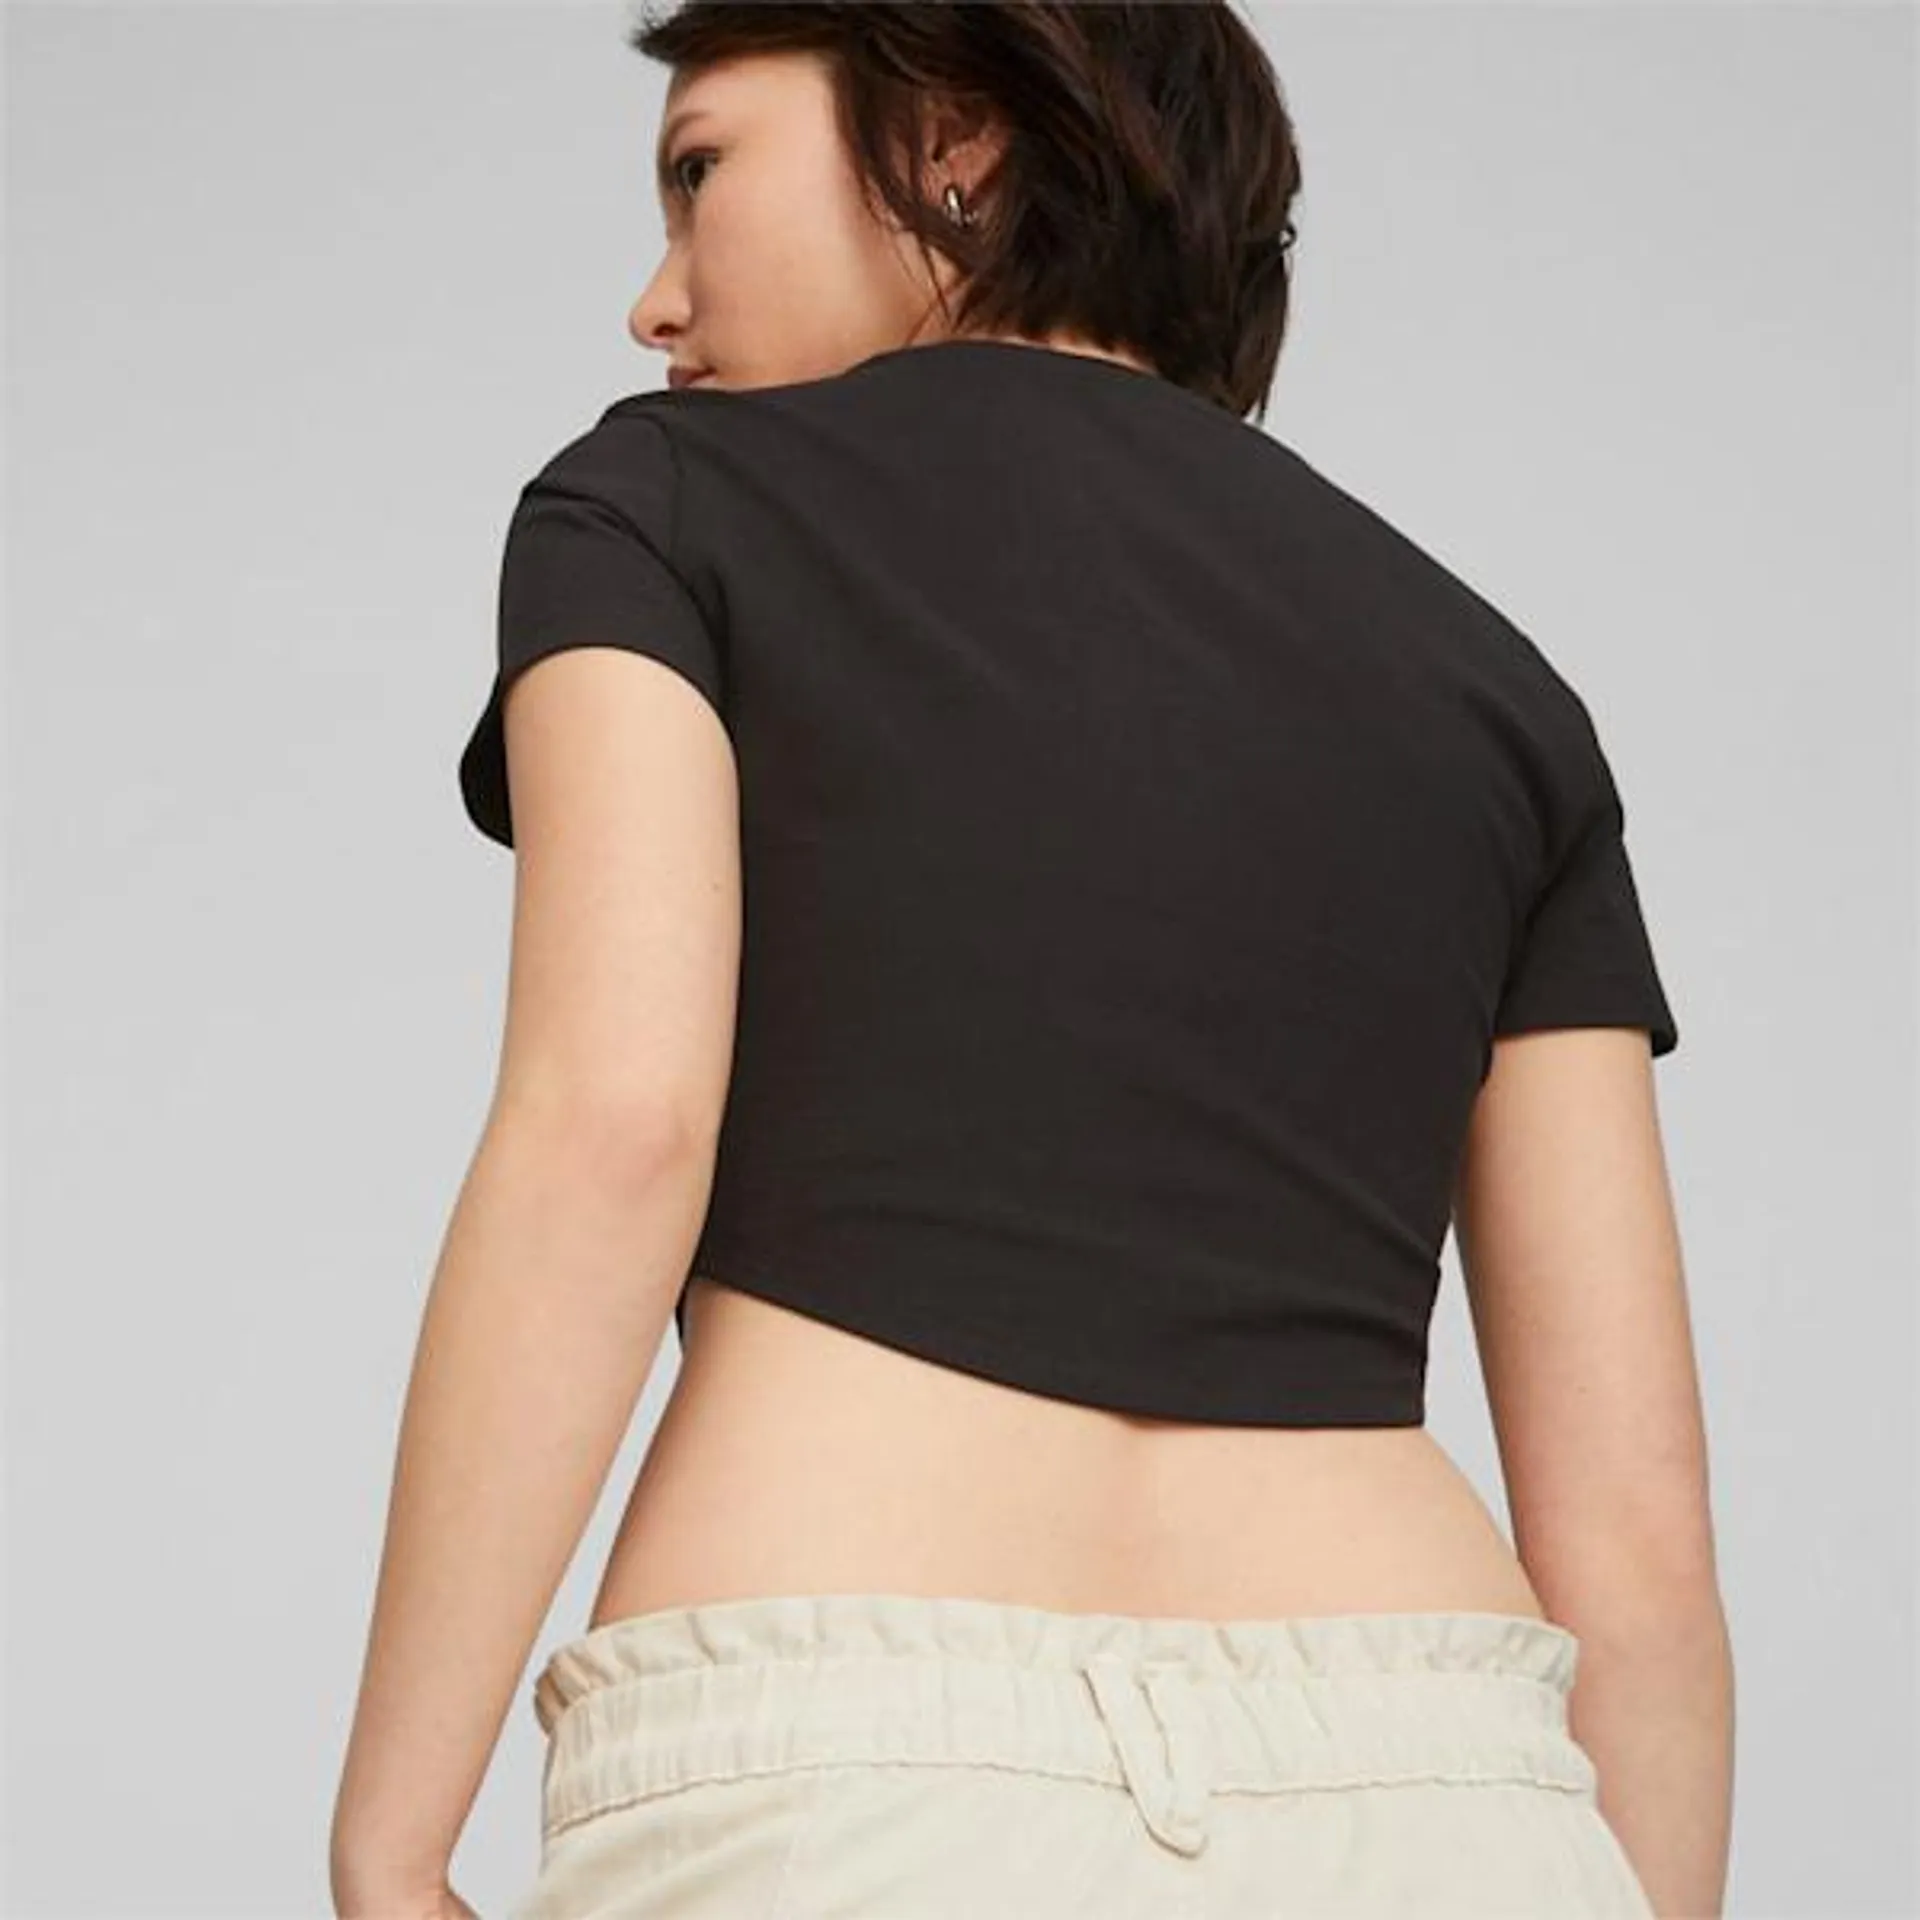 DARE TO Women's Cropped Tee